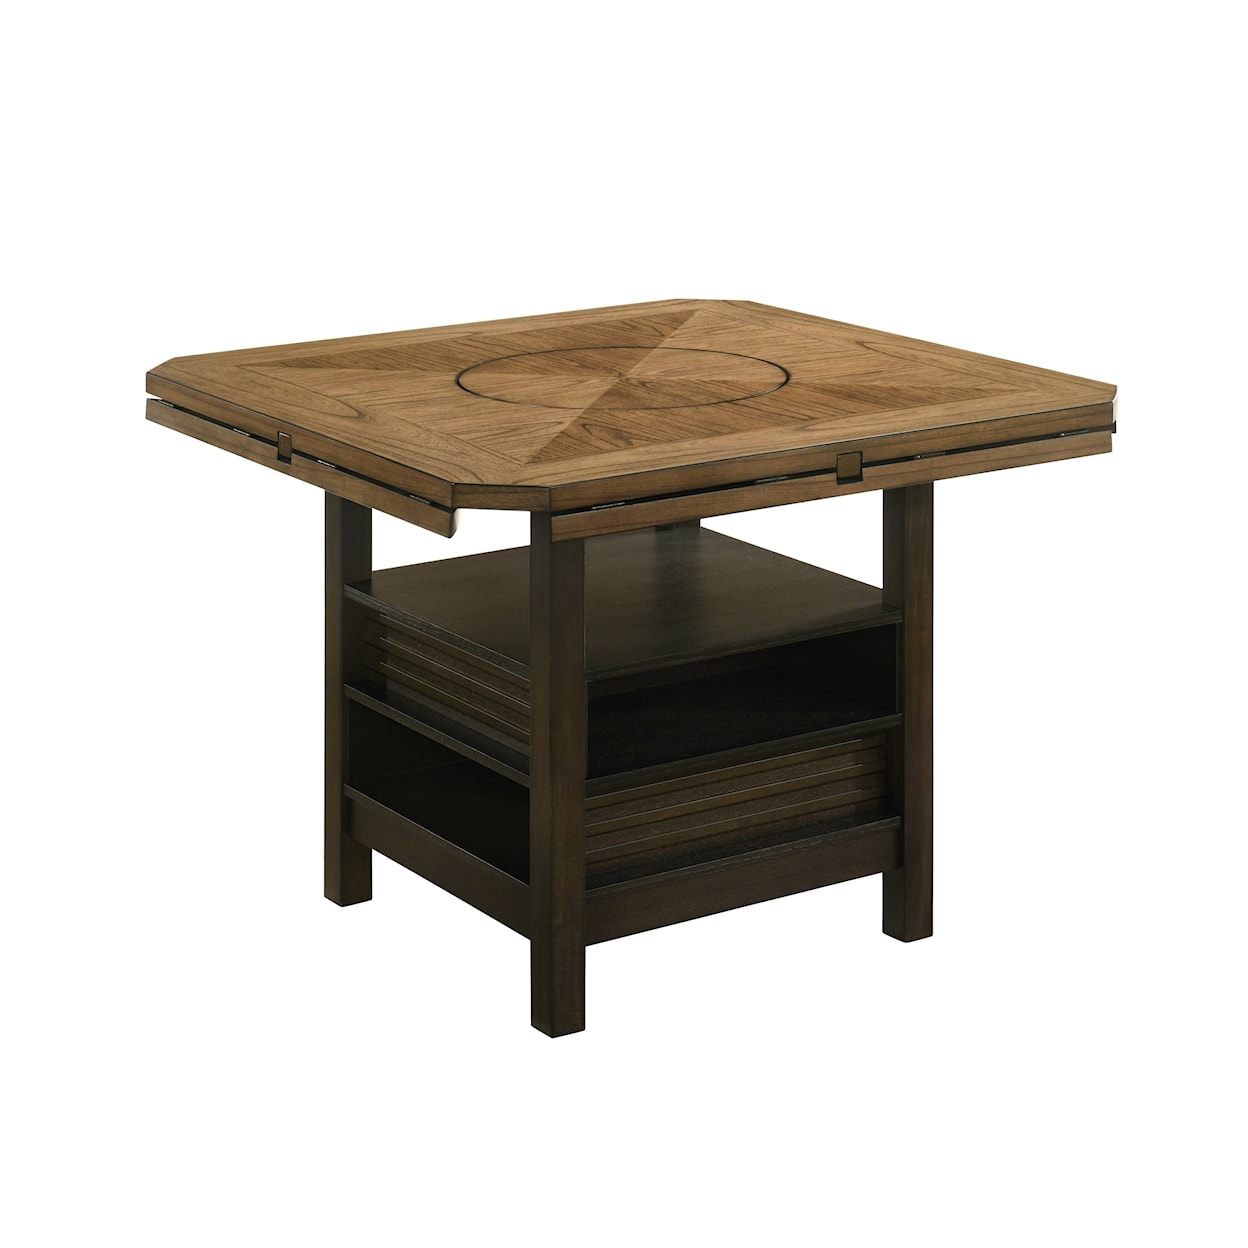 Crown Mark OAKLY Counter Height Table